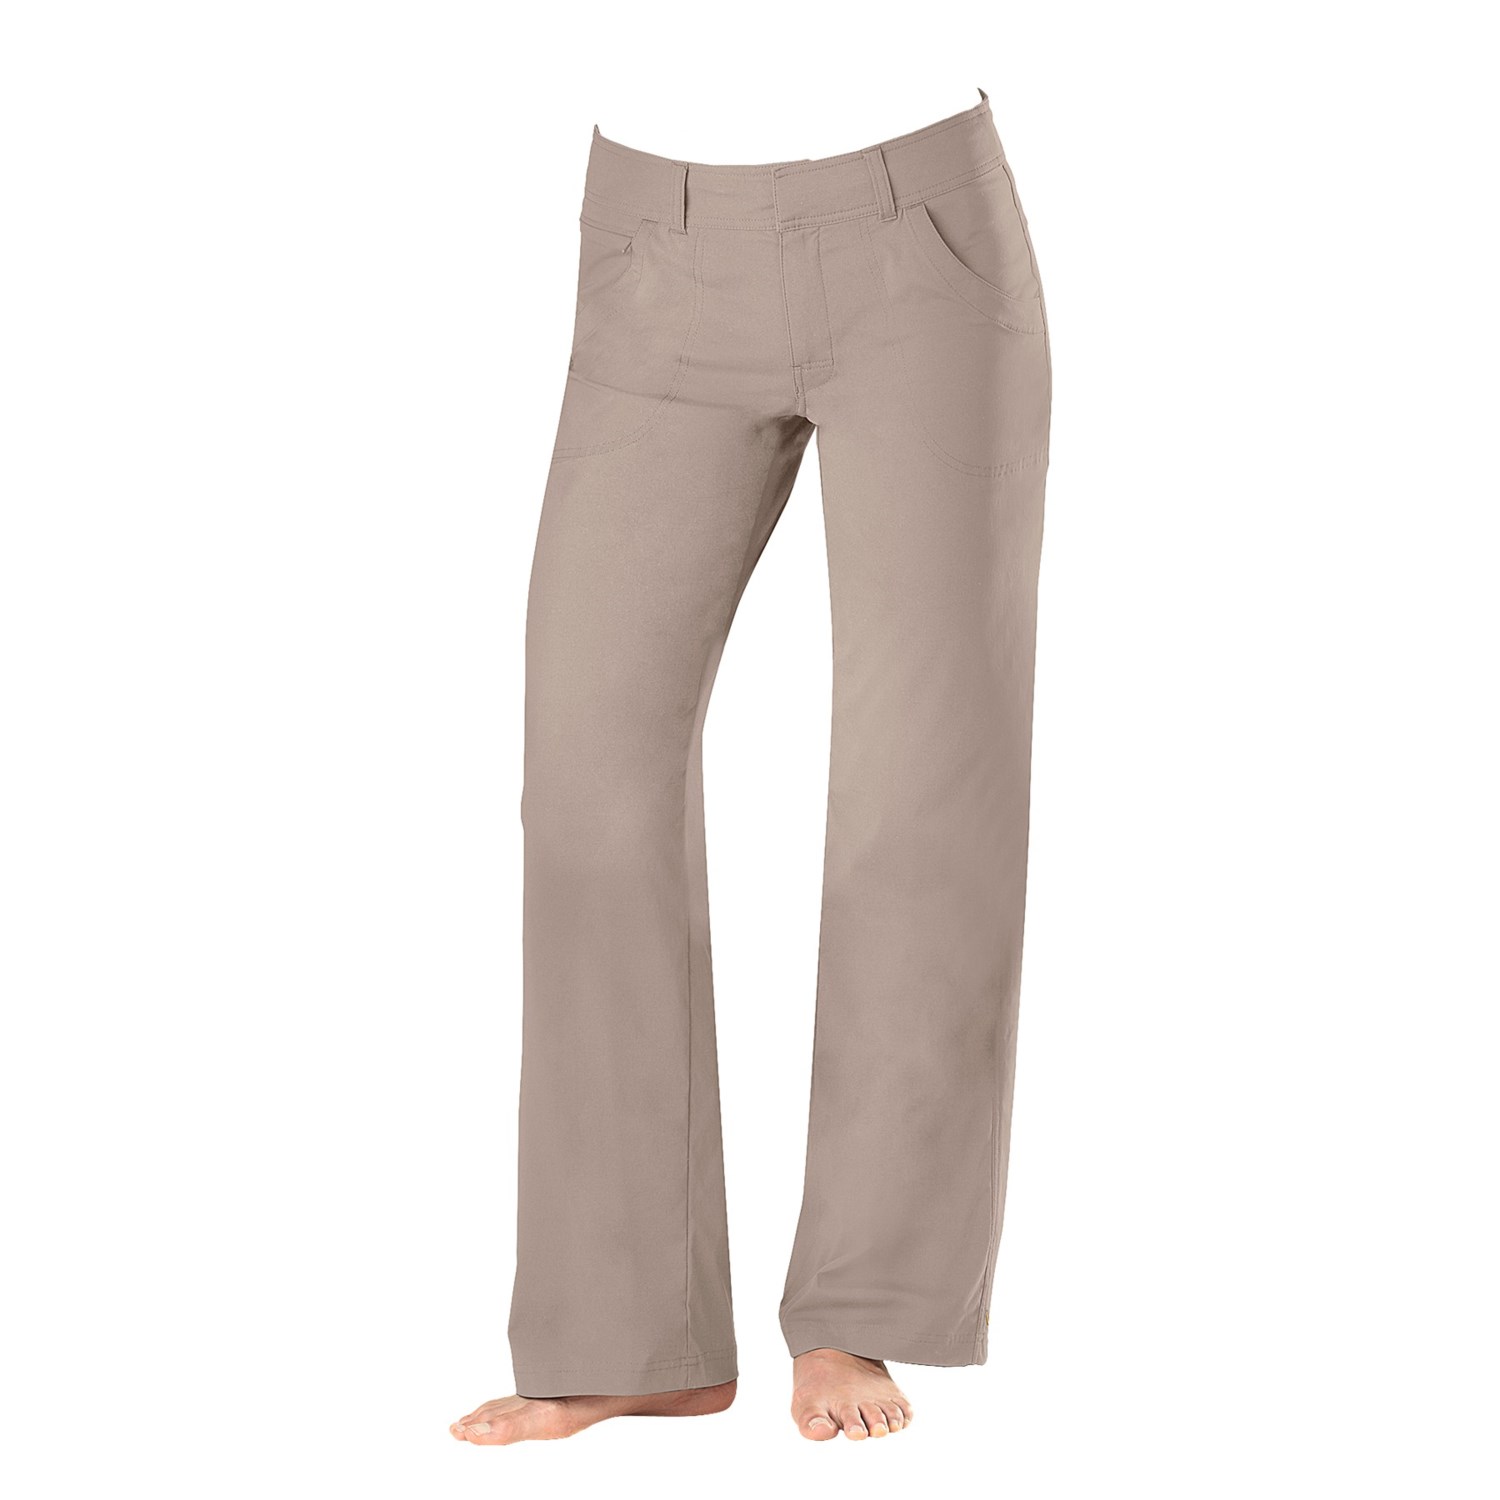 lucy Walkabout Pants (For Women) - Save 35%